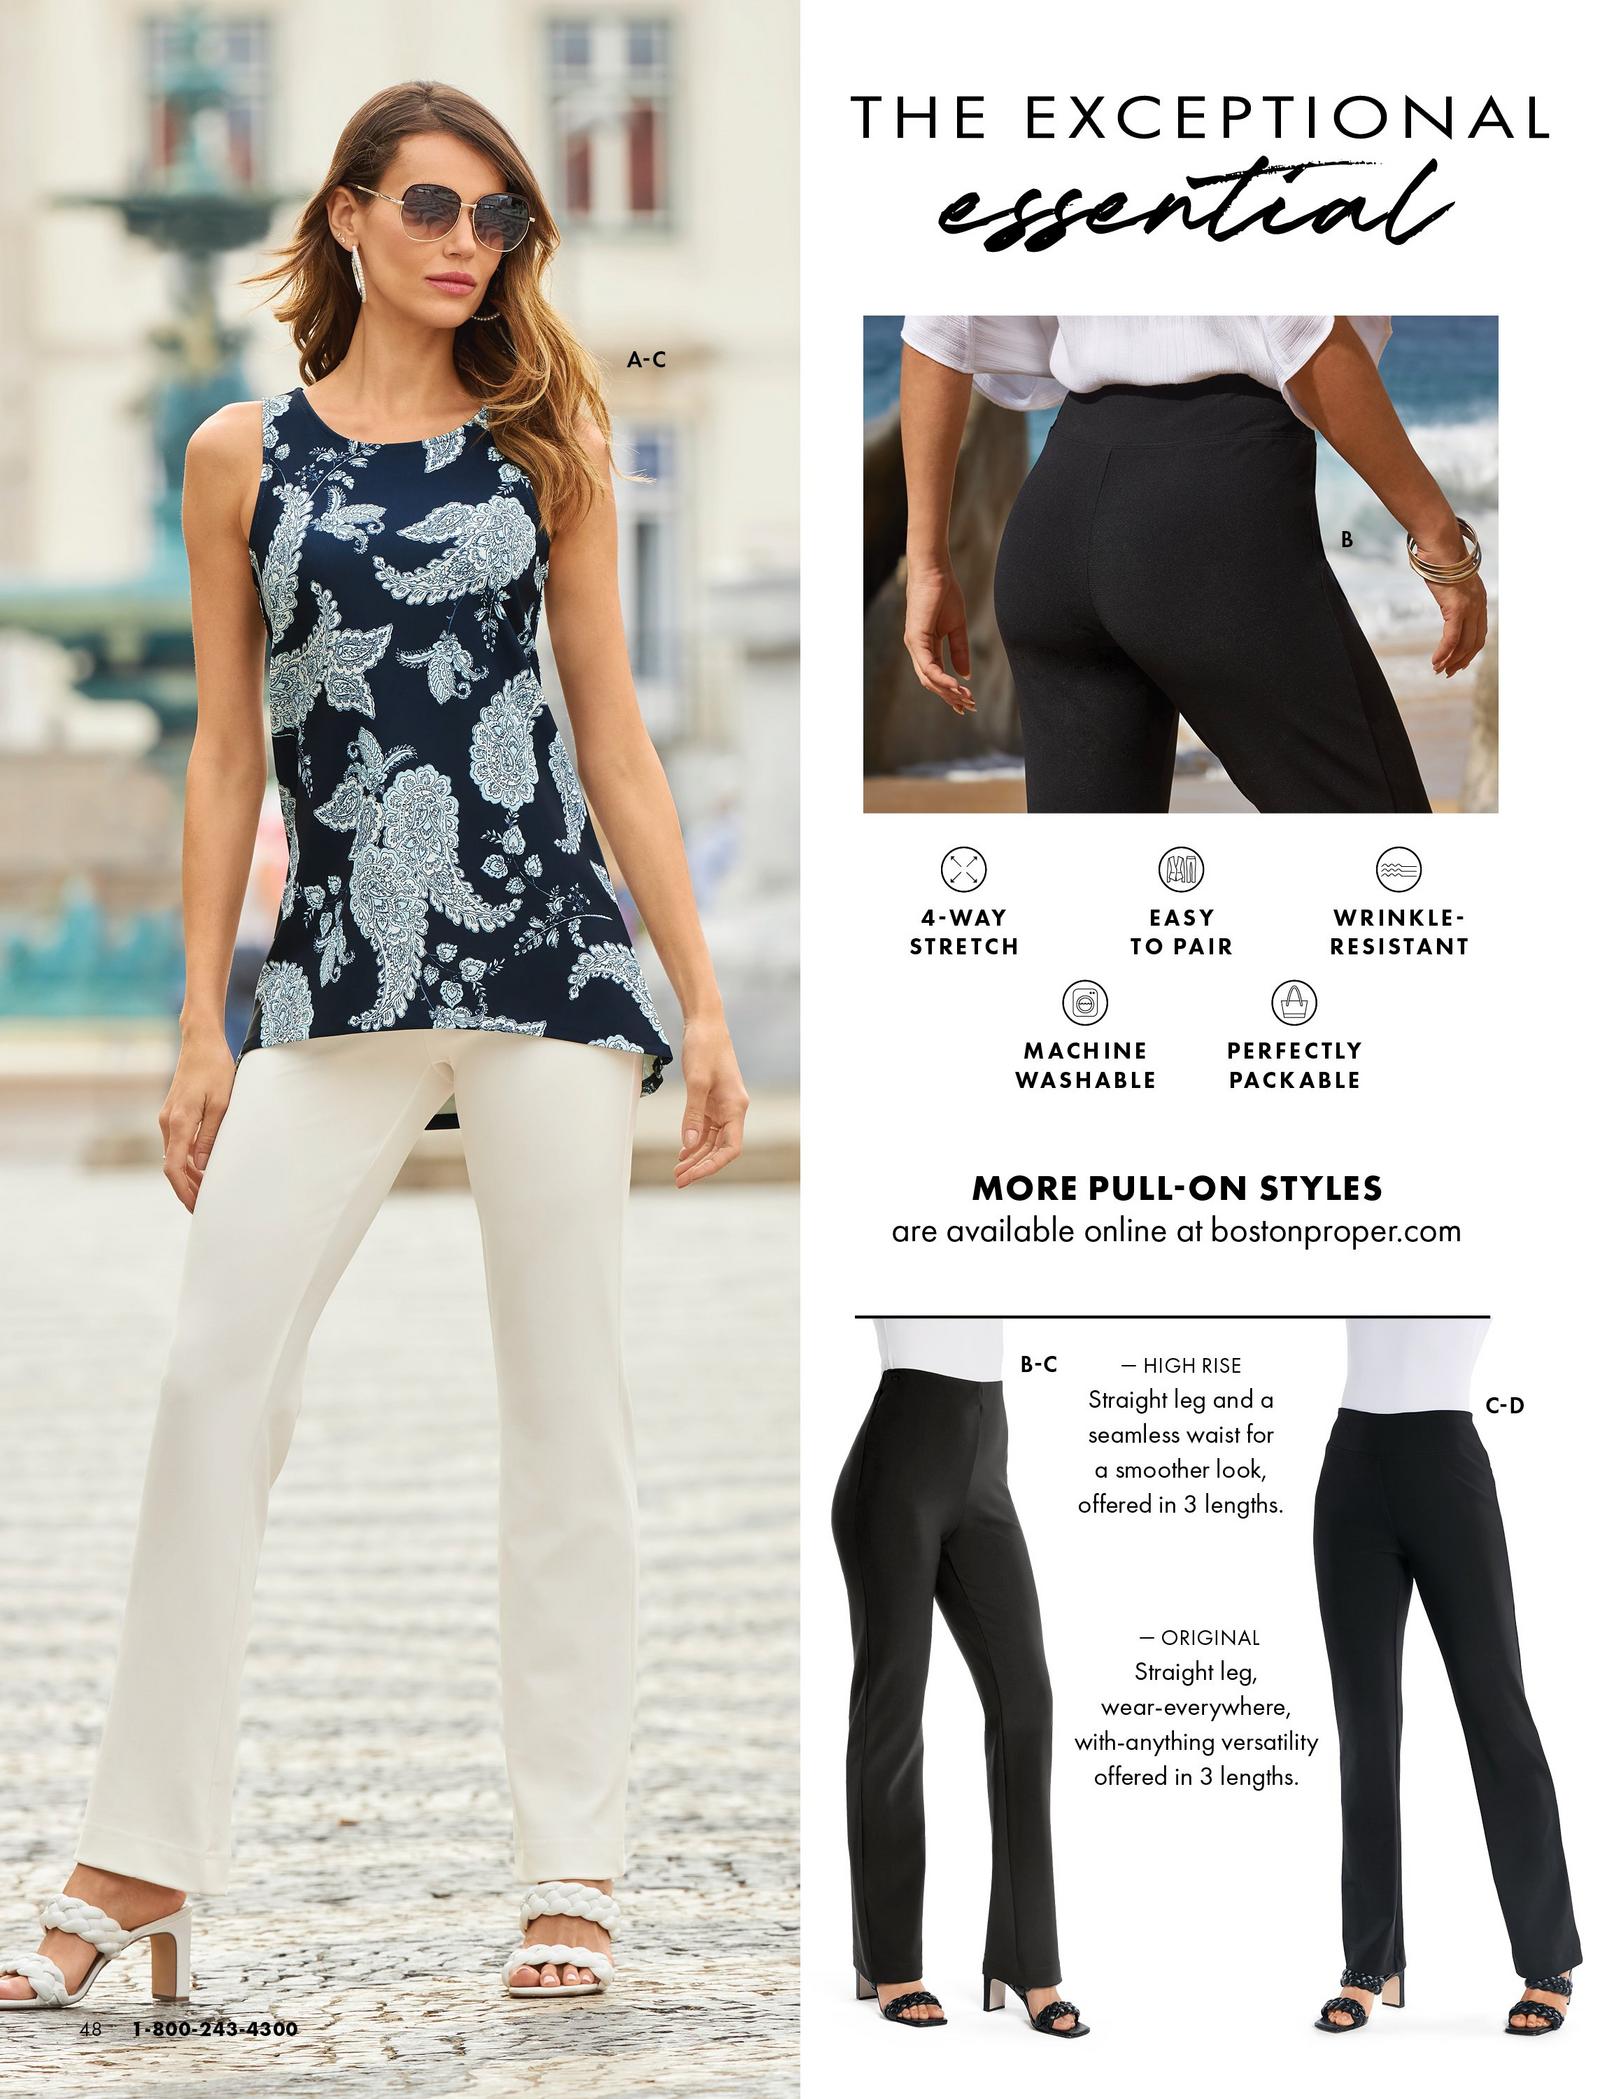 left model wearing a blue paisley print high-neck tank top, white pants, white block heels, and sunglasses. right panel shows the beyond travel pant and high-waisted beyond travel pant.